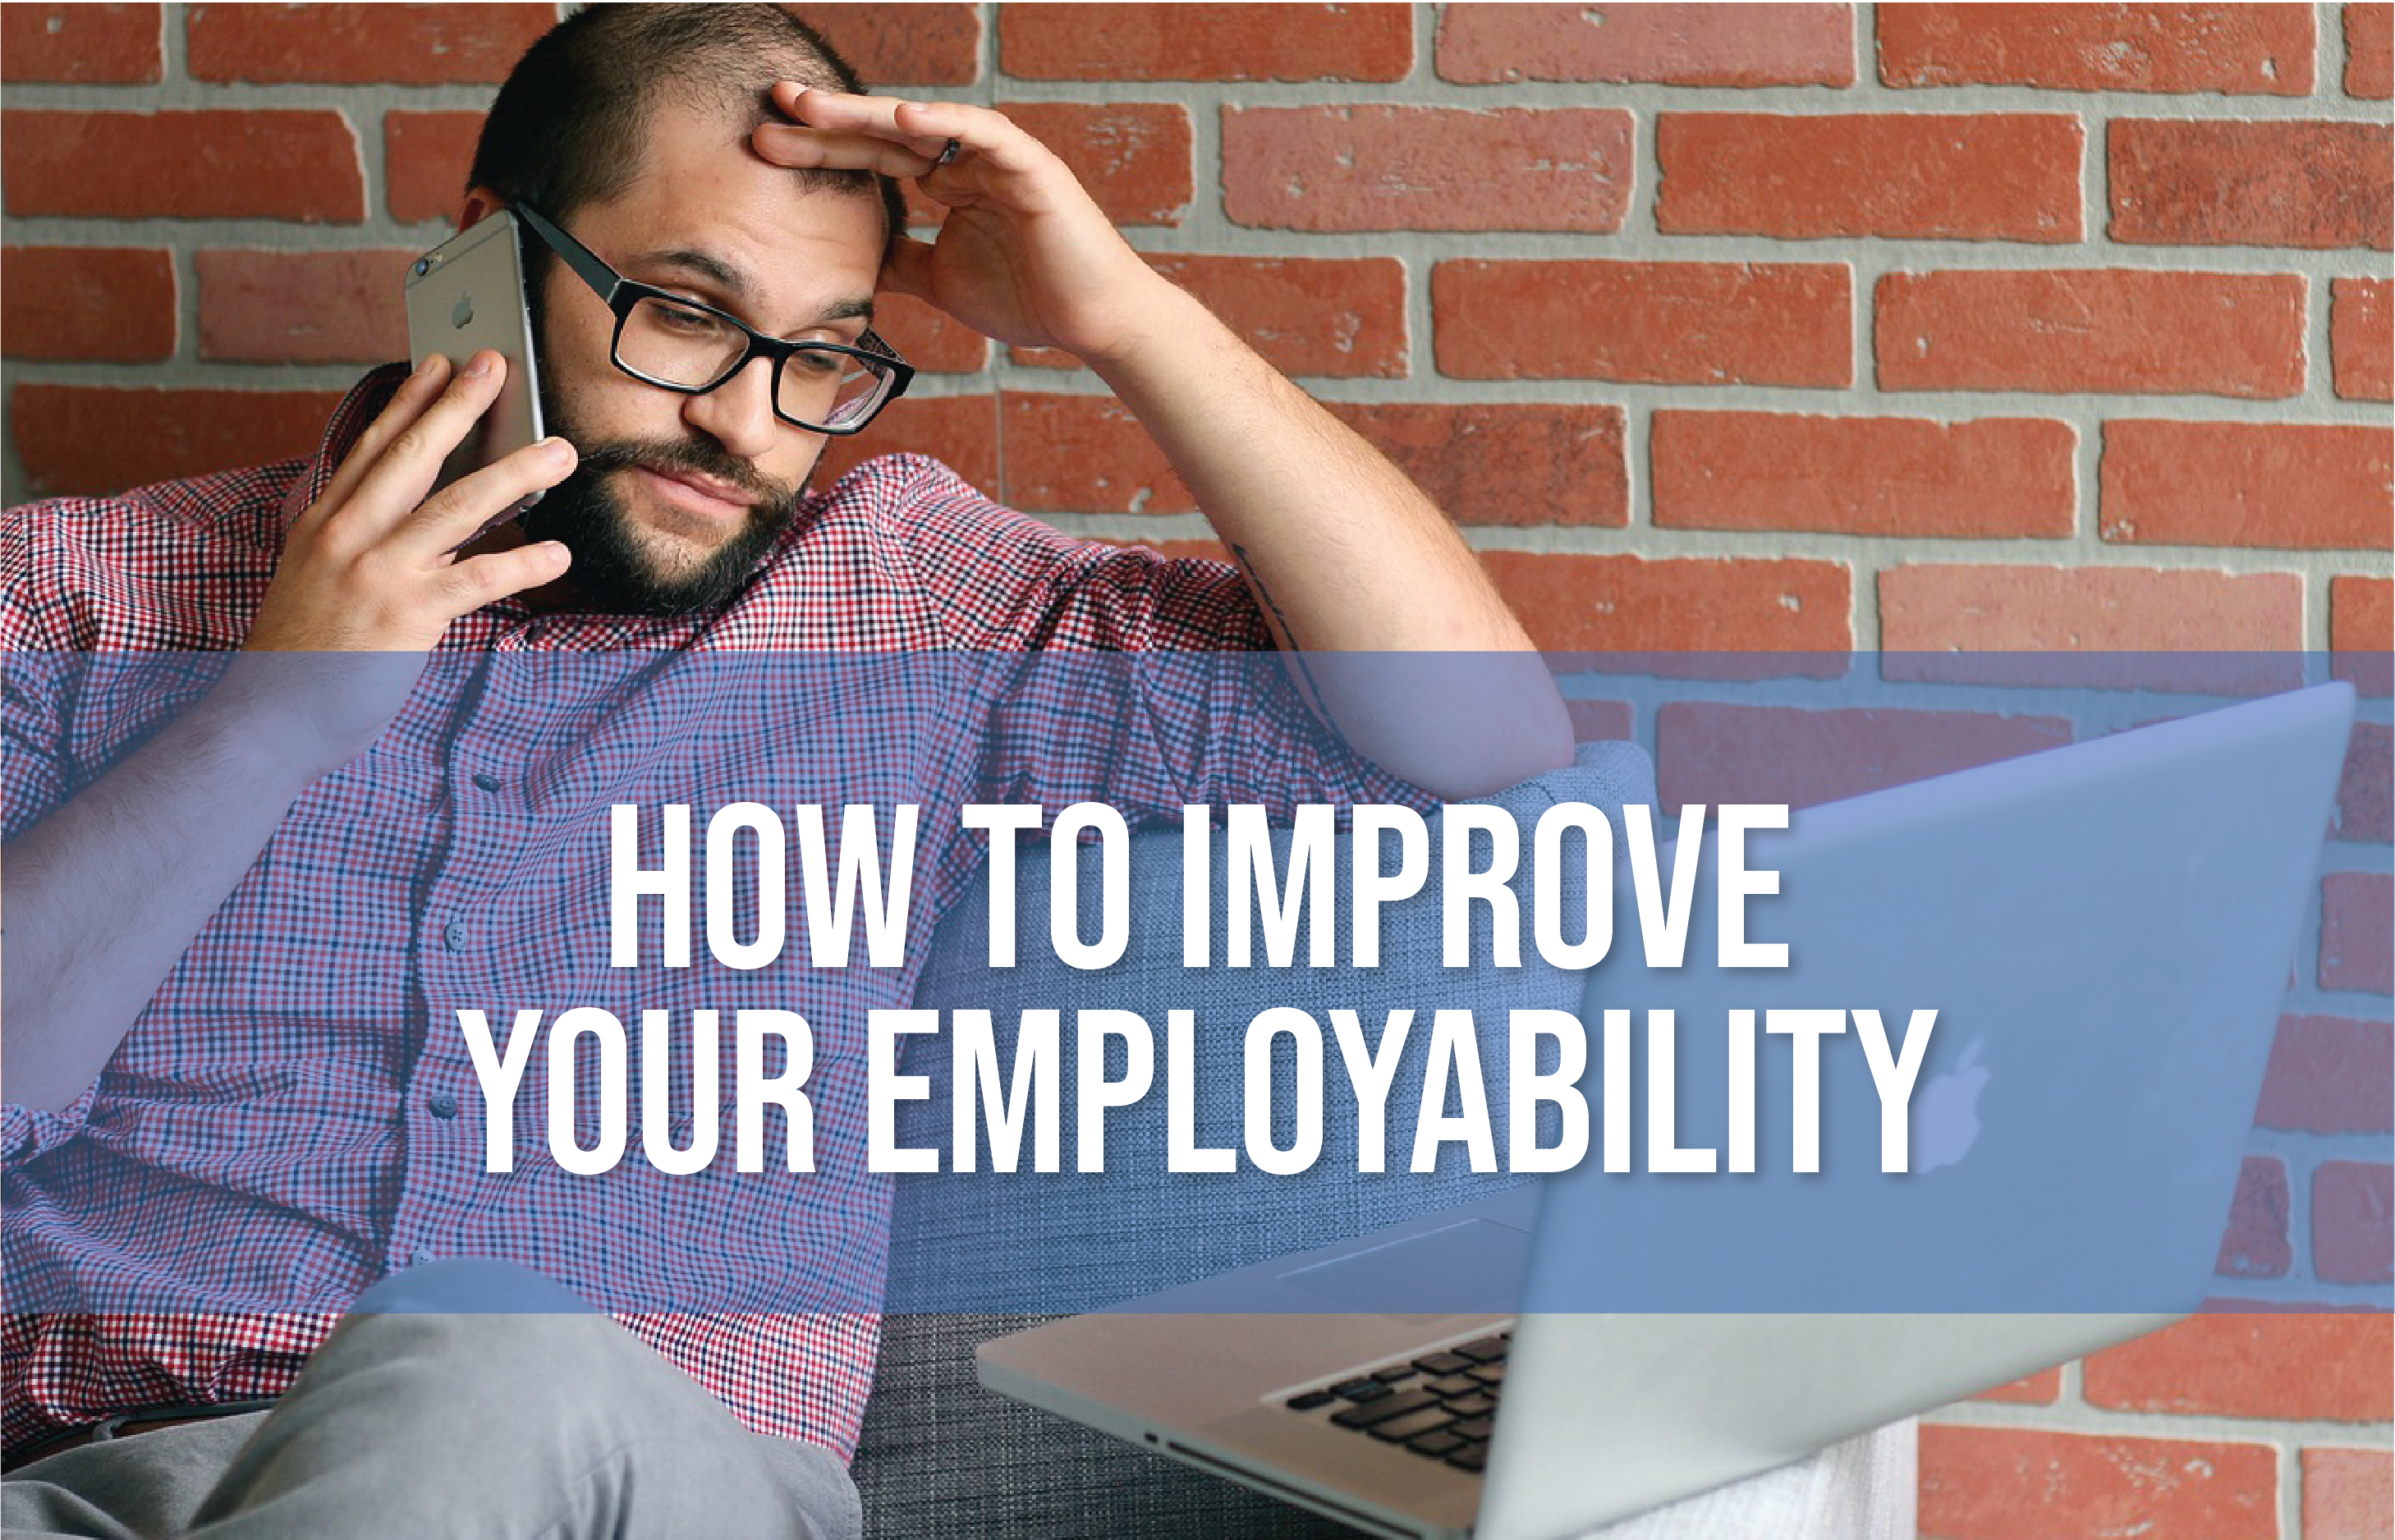 How to improve your employability